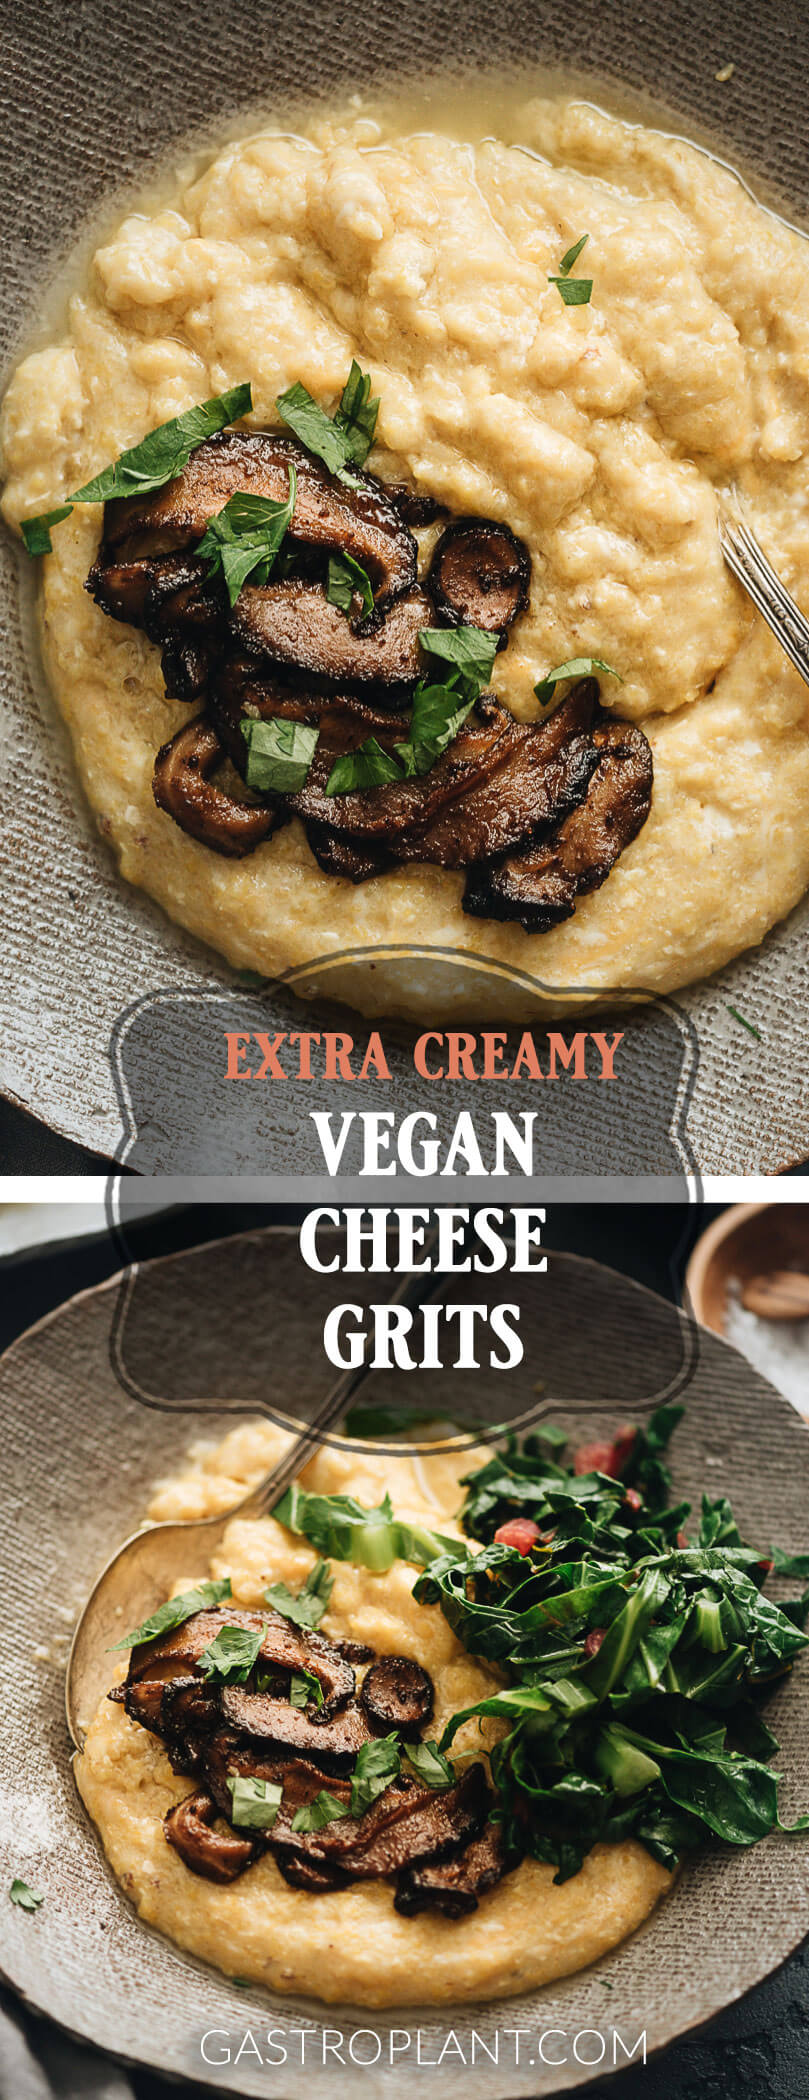 Vegan cheese grits collage